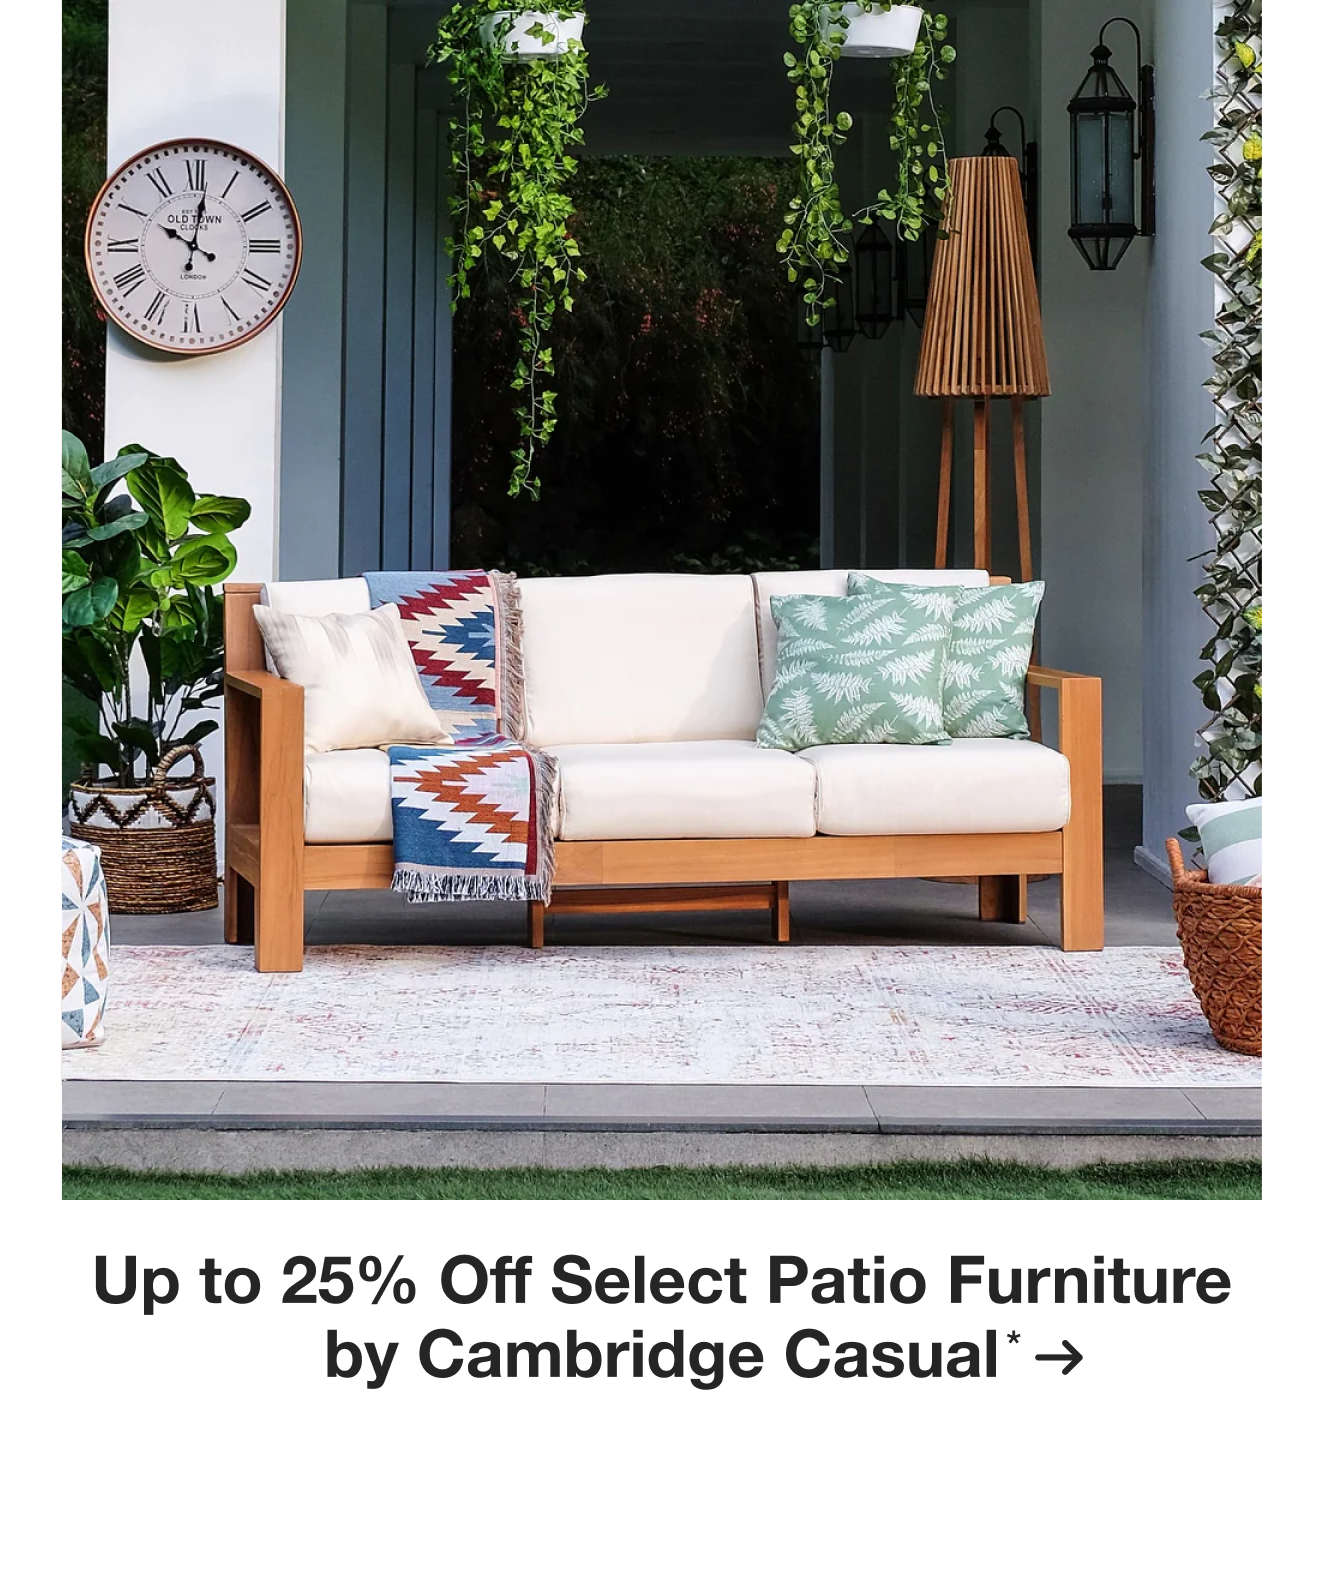 Up to 25% Off Select Patio Furniture by Cambridge Casual*